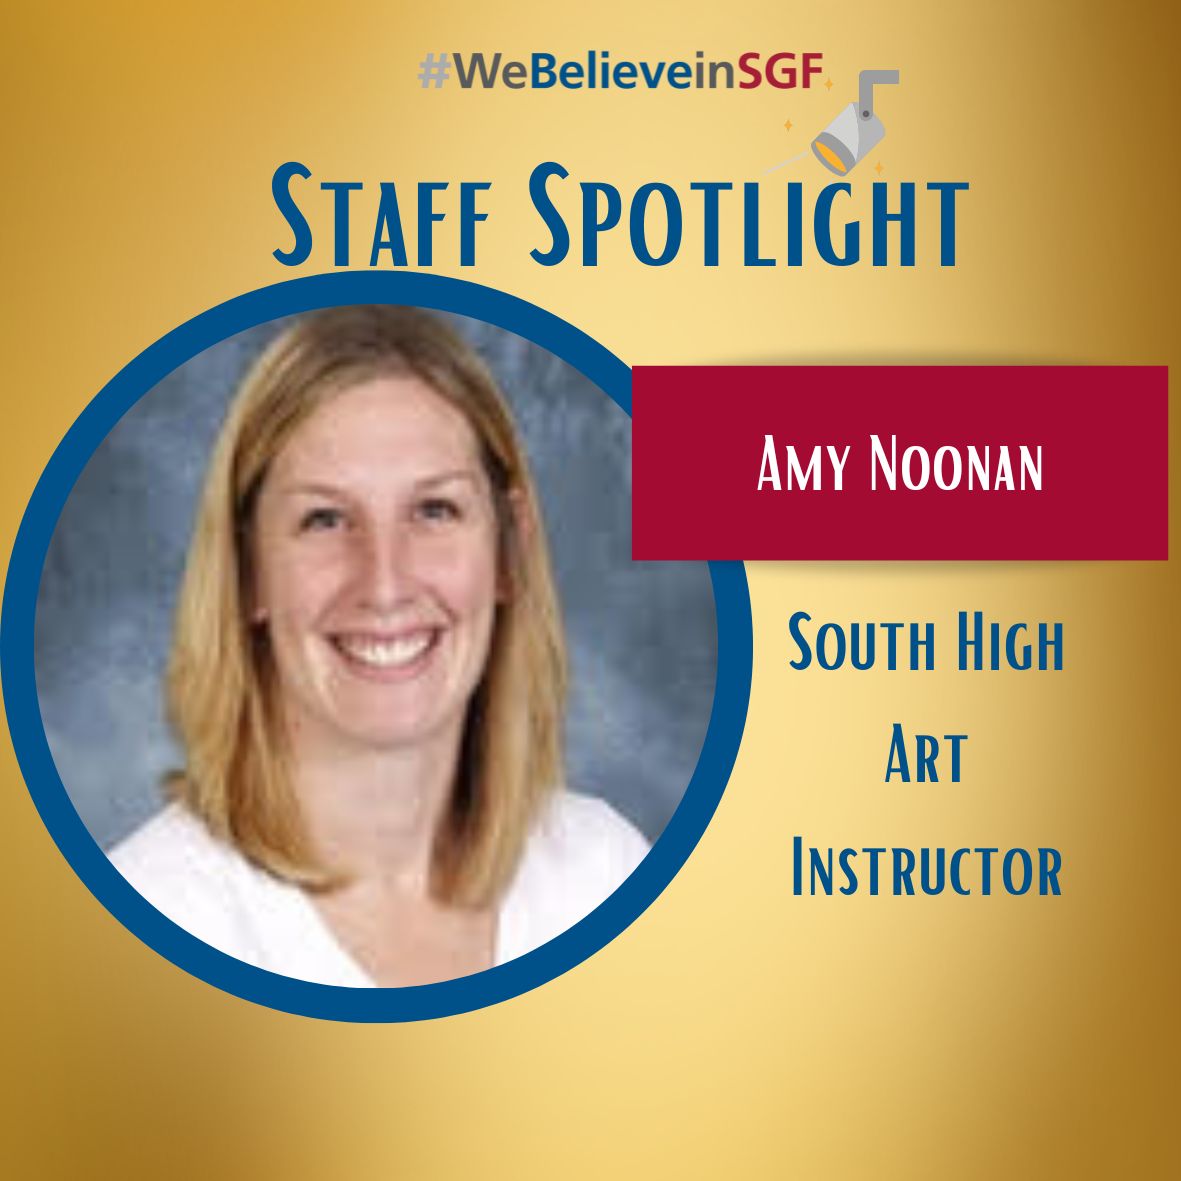 Amy Noonan has really worked hard to offer a variety of new opportunities for students and to reinforce existing opportunities that may have faded during pandemic life, and she deserves to be recognized.